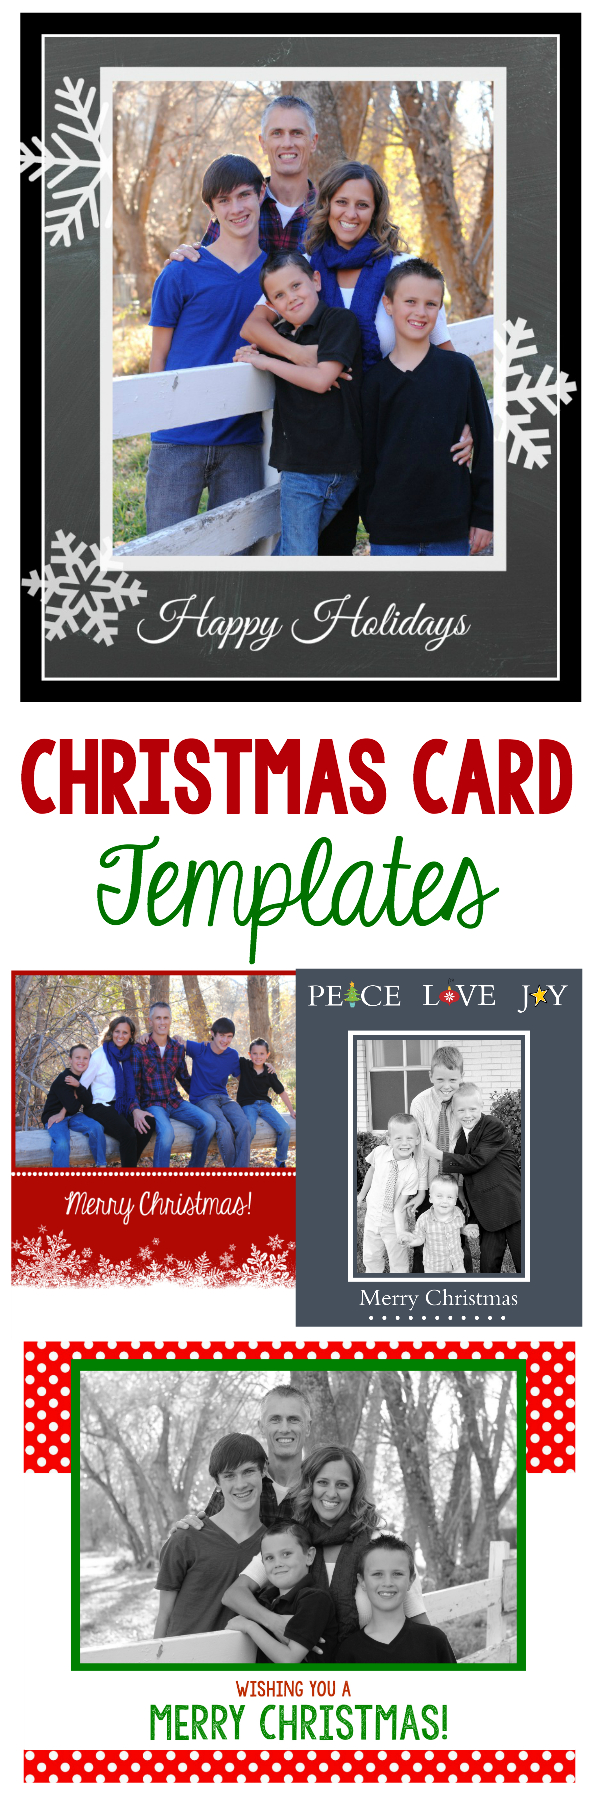 50 + Free Holiday Photo Card Templates | Moritz Fine Designs Throughout Free Christmas Card Templates For Photographers